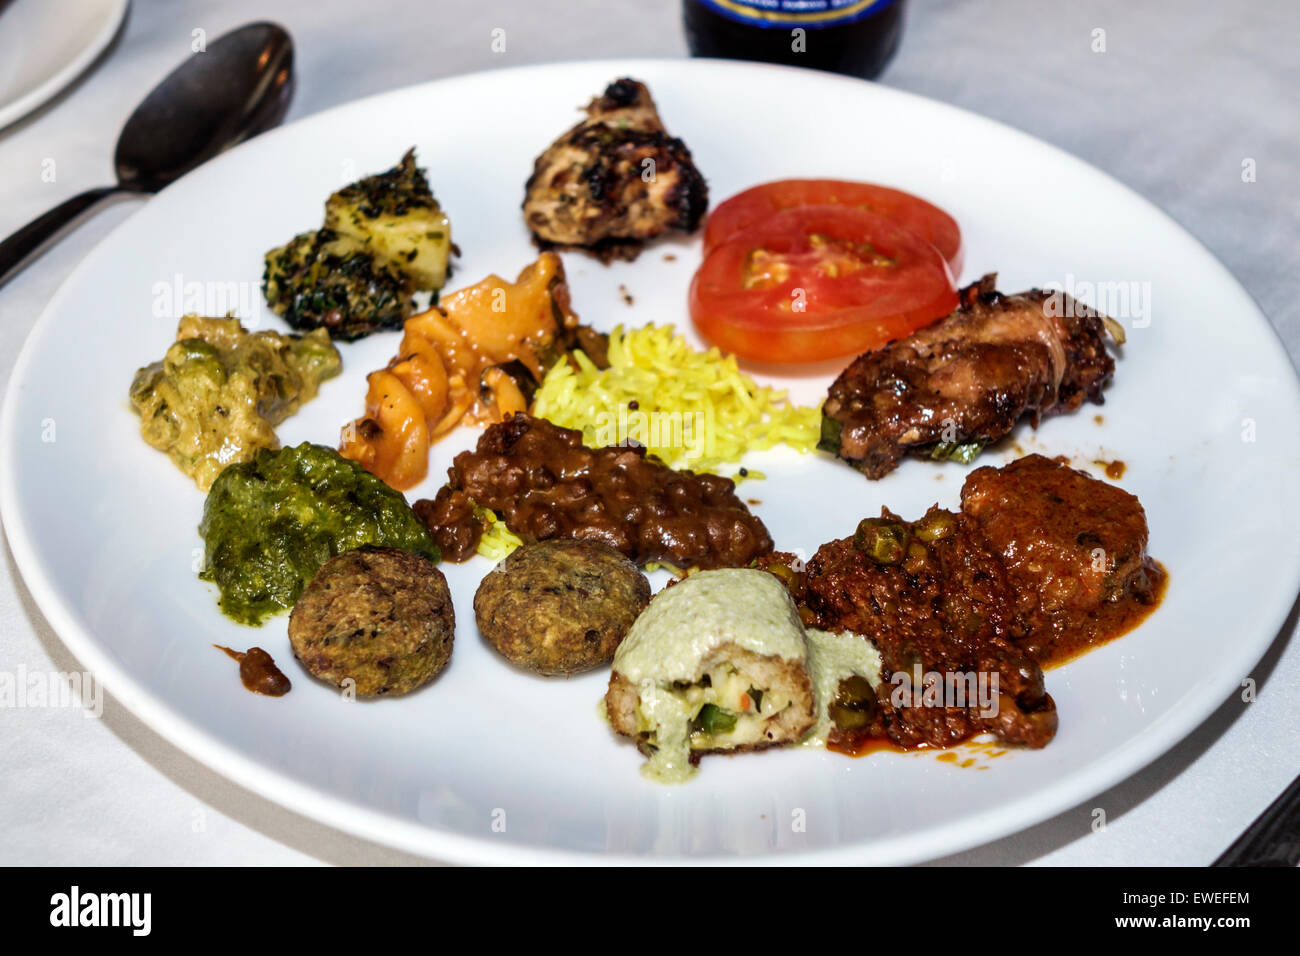 Mumbai India,Churchgate,Veer Nariman Road,Indian Summer,restaurant restaurants food dining cafe cafes,buffet style,plate,food,cuisine,spoon,fork,meat, Stock Photo